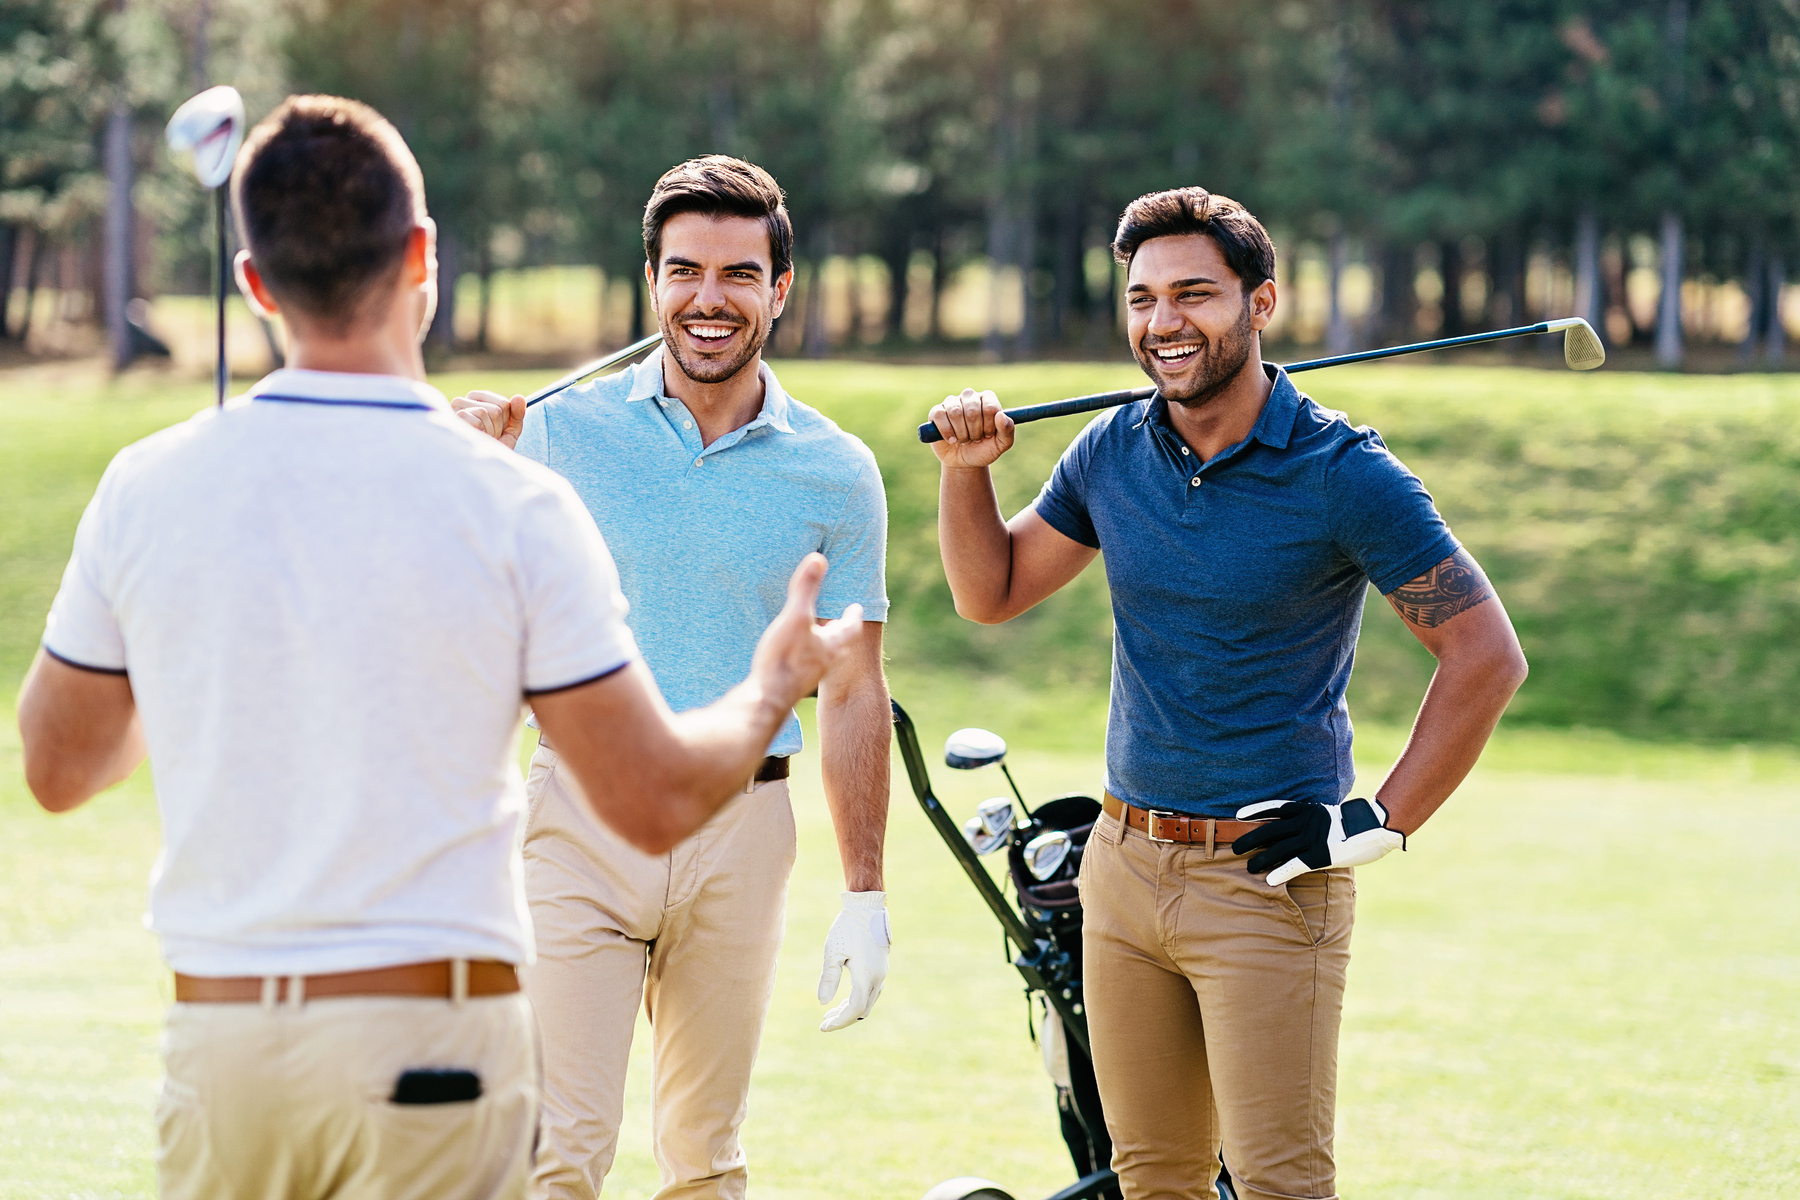 Male friends playing golf together